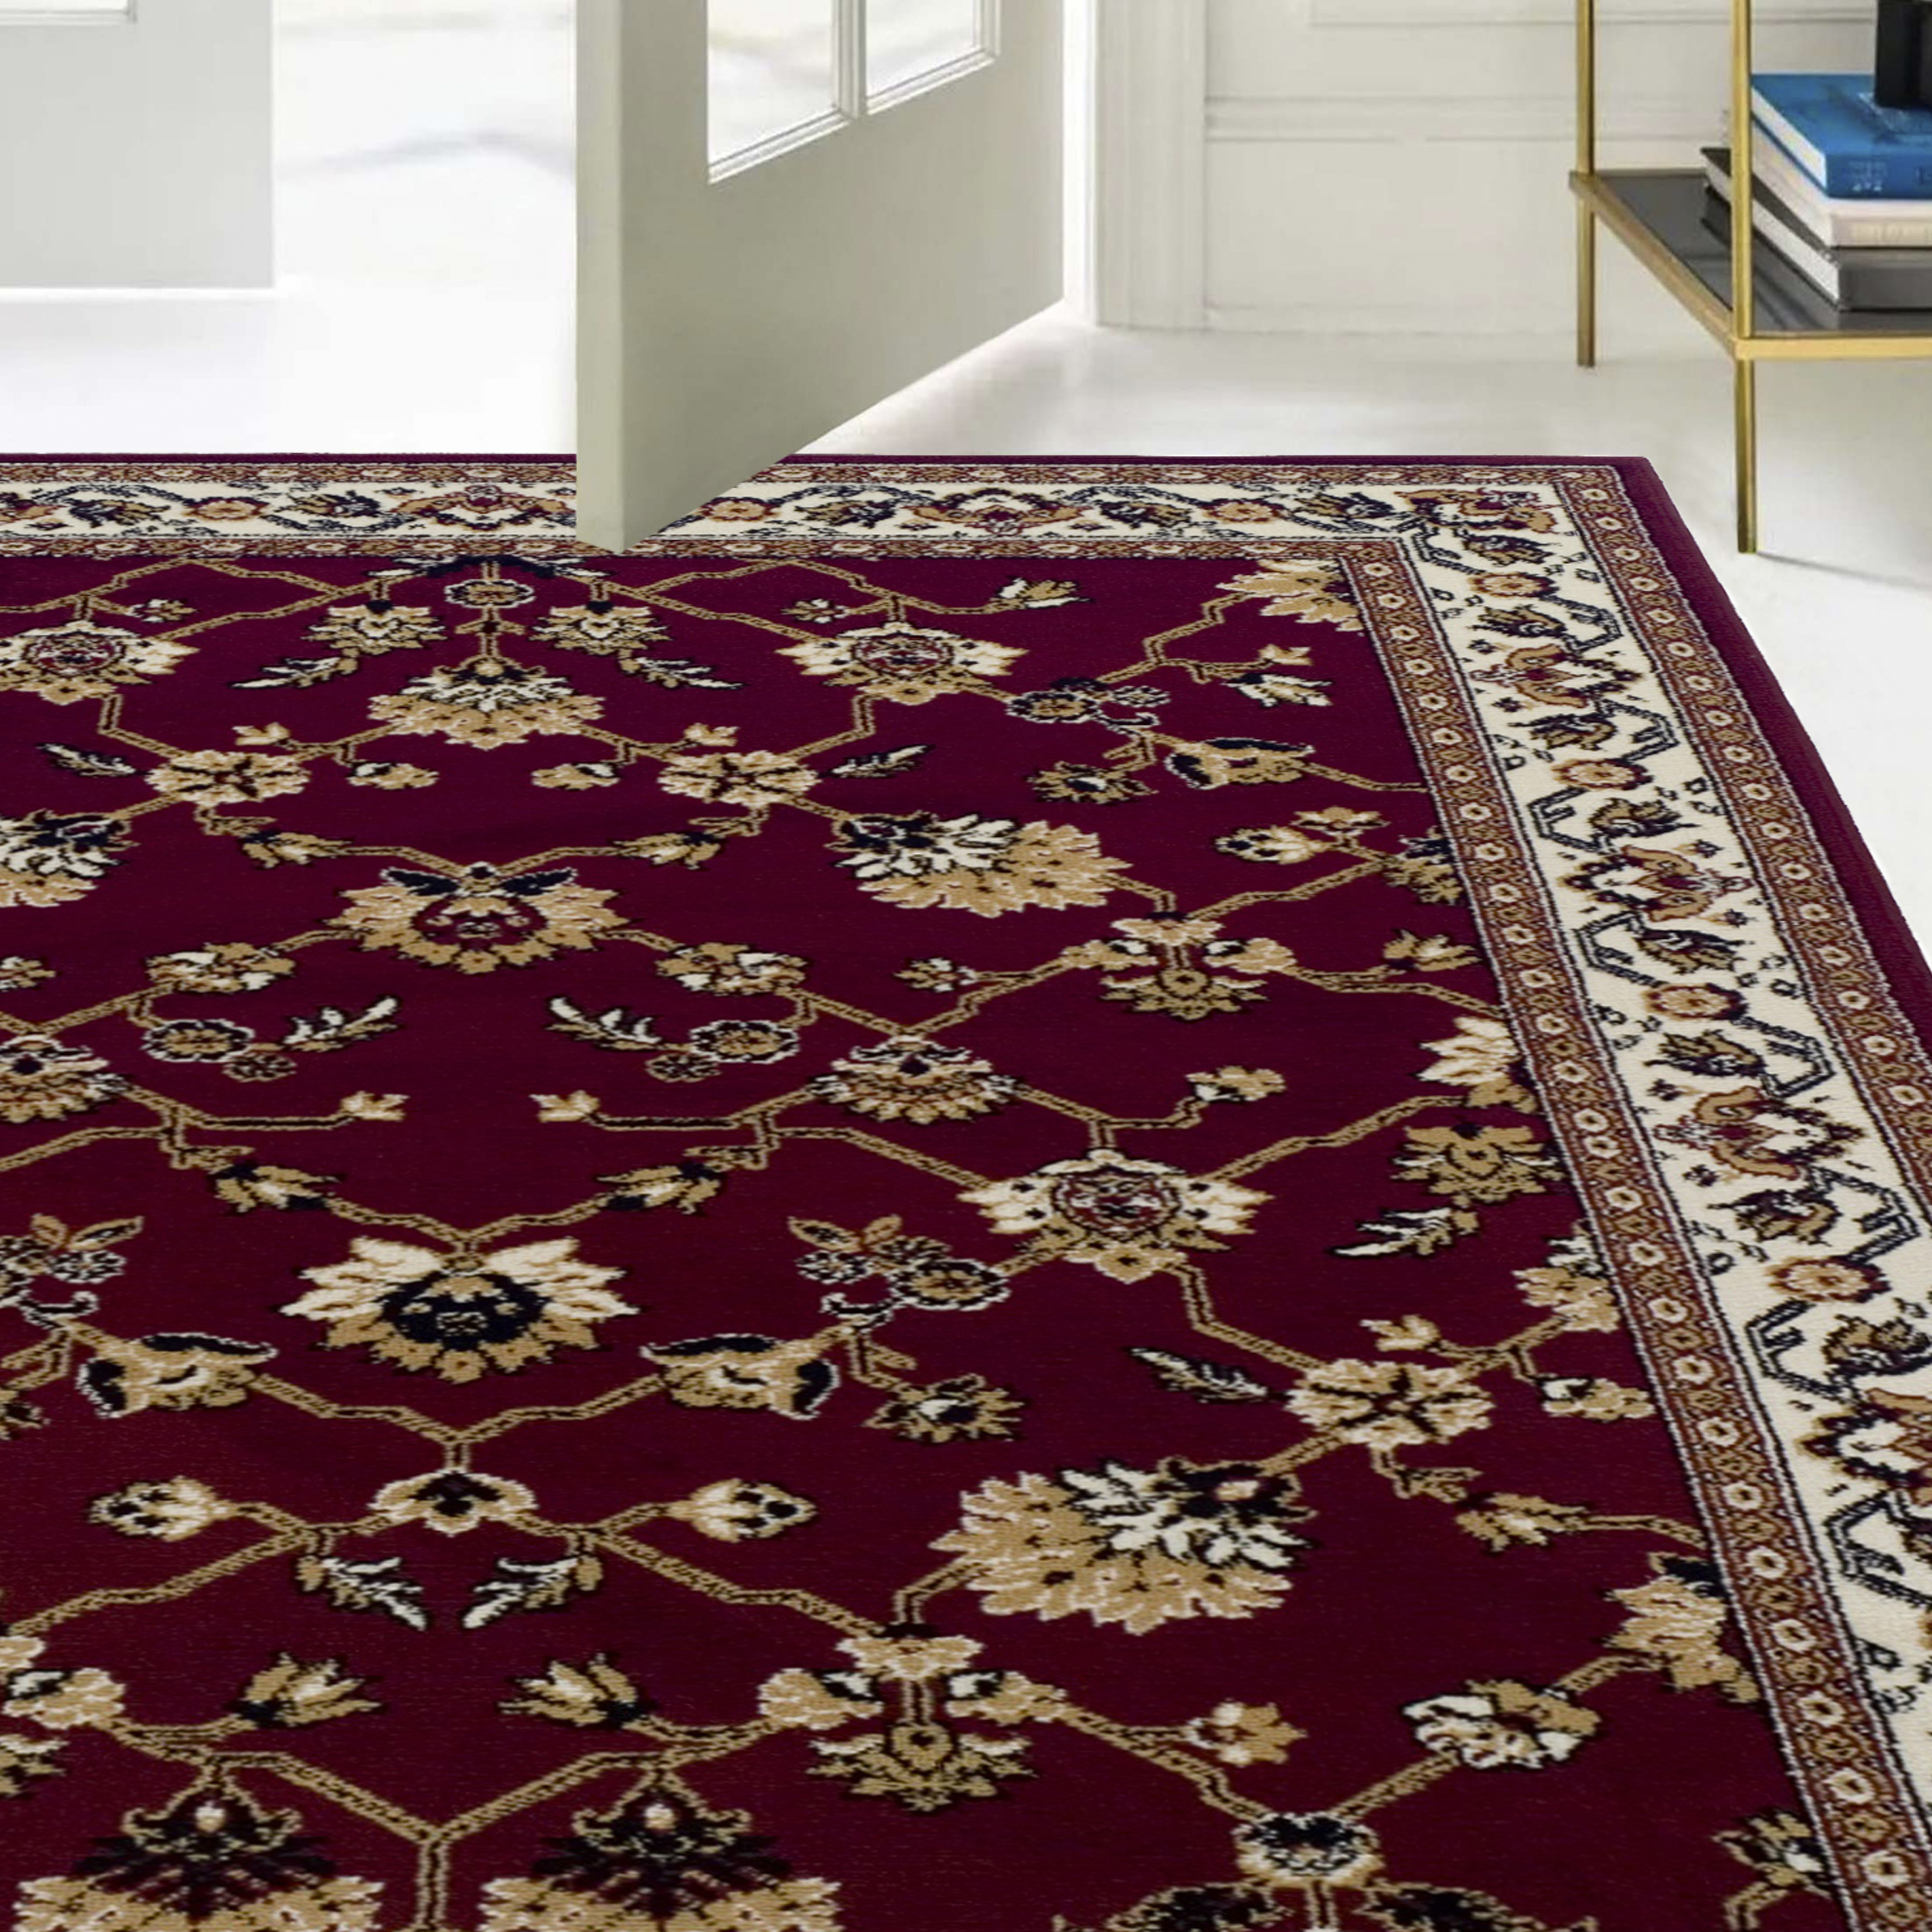 Kingfield Designer Area Rug Collection - image 5 of 5